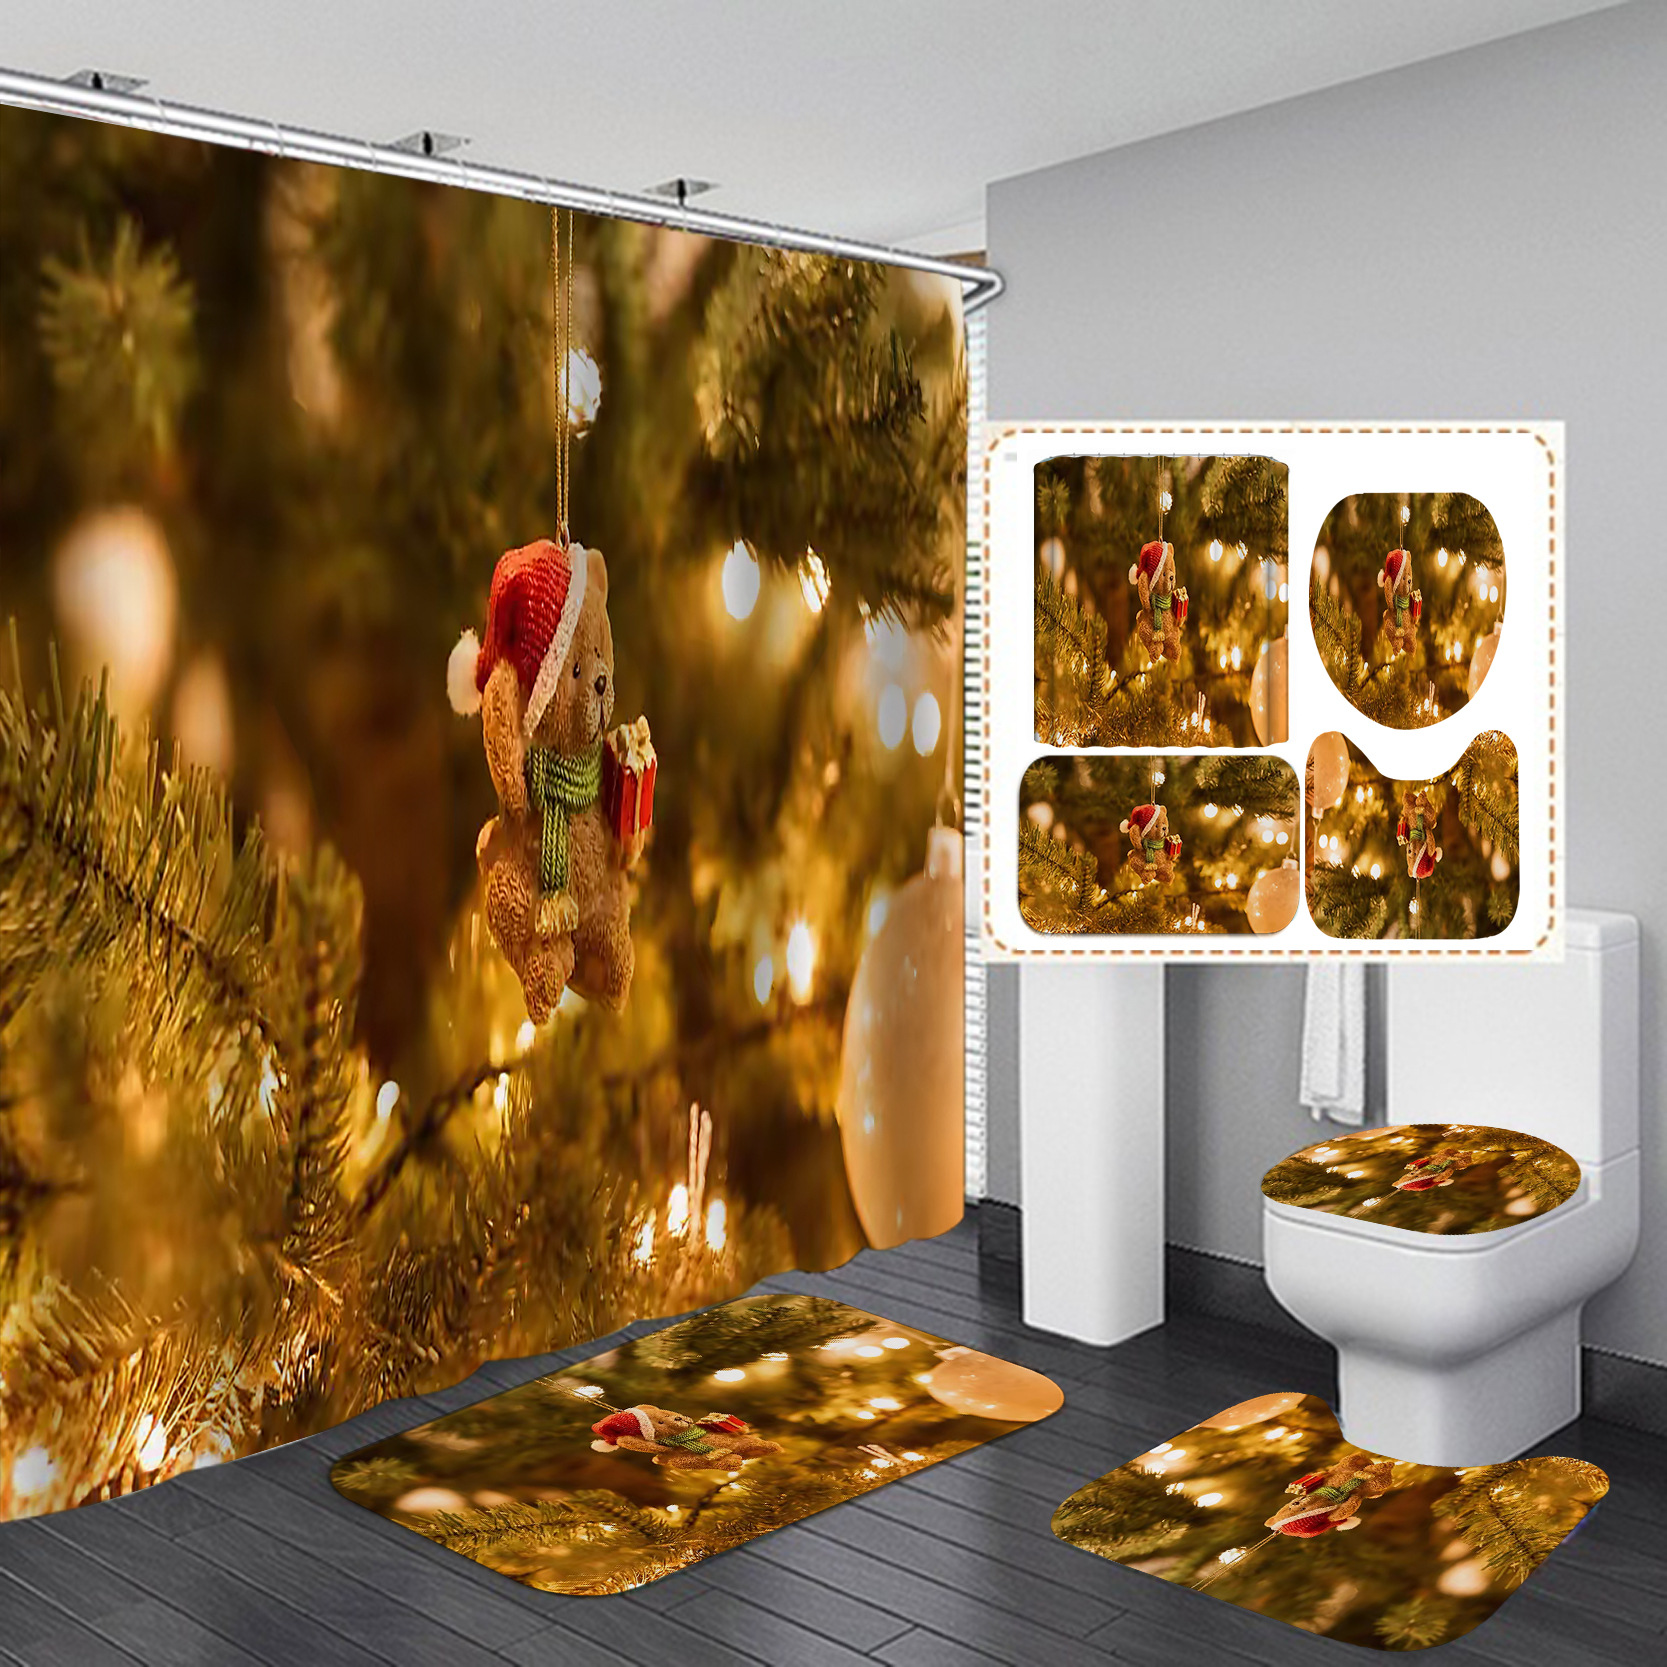 Amazon Direct Sales Christmas Shower Curtain Set Series Waterproof Punch-Free Partition Curtain Hotel Rain Curtain